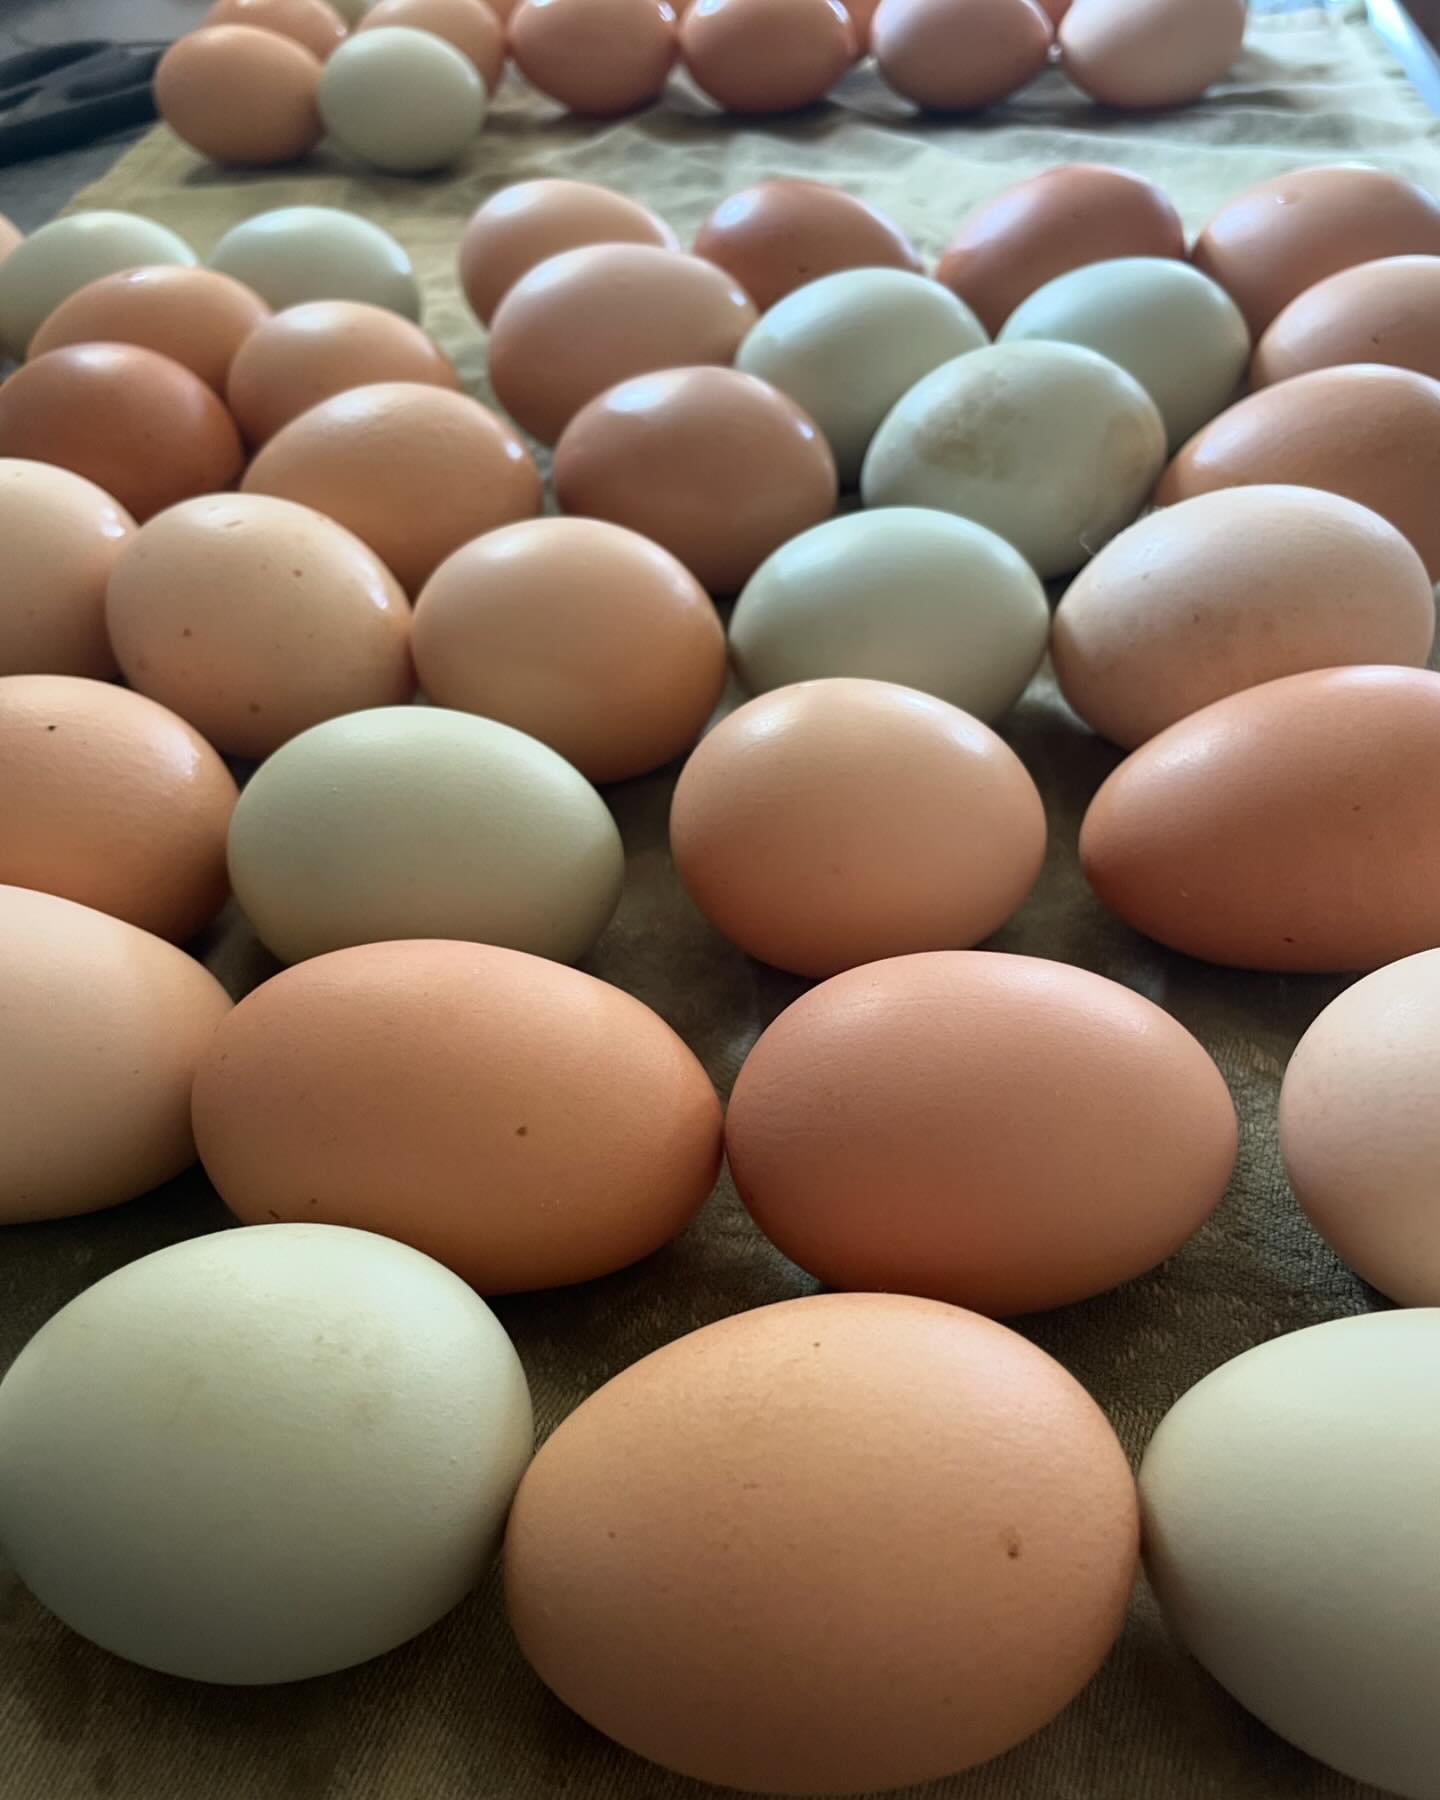 Happy Earth day! Our farm store is open and stocked up with lots of organic eggs, pork and soap. Lucy the cat may come by to visit you, but she likely won&rsquo;t jump on your car as she does sometimes to mine. We also want to share that we welcomed 